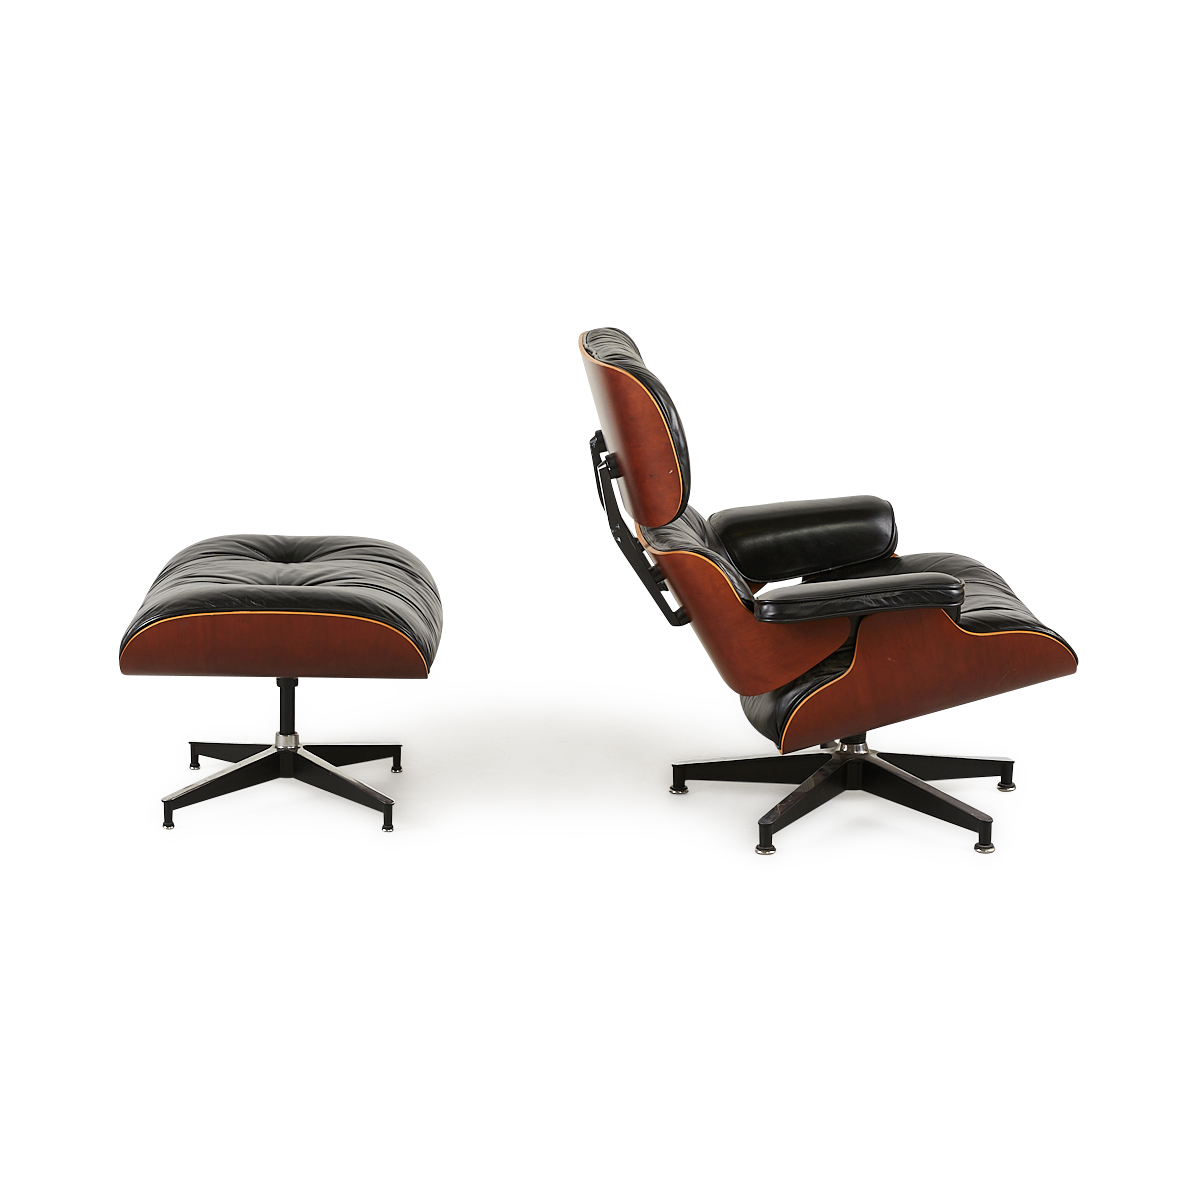 Eames for Herman Miller Lounge Chair and Ottoman - Image 4 of 13